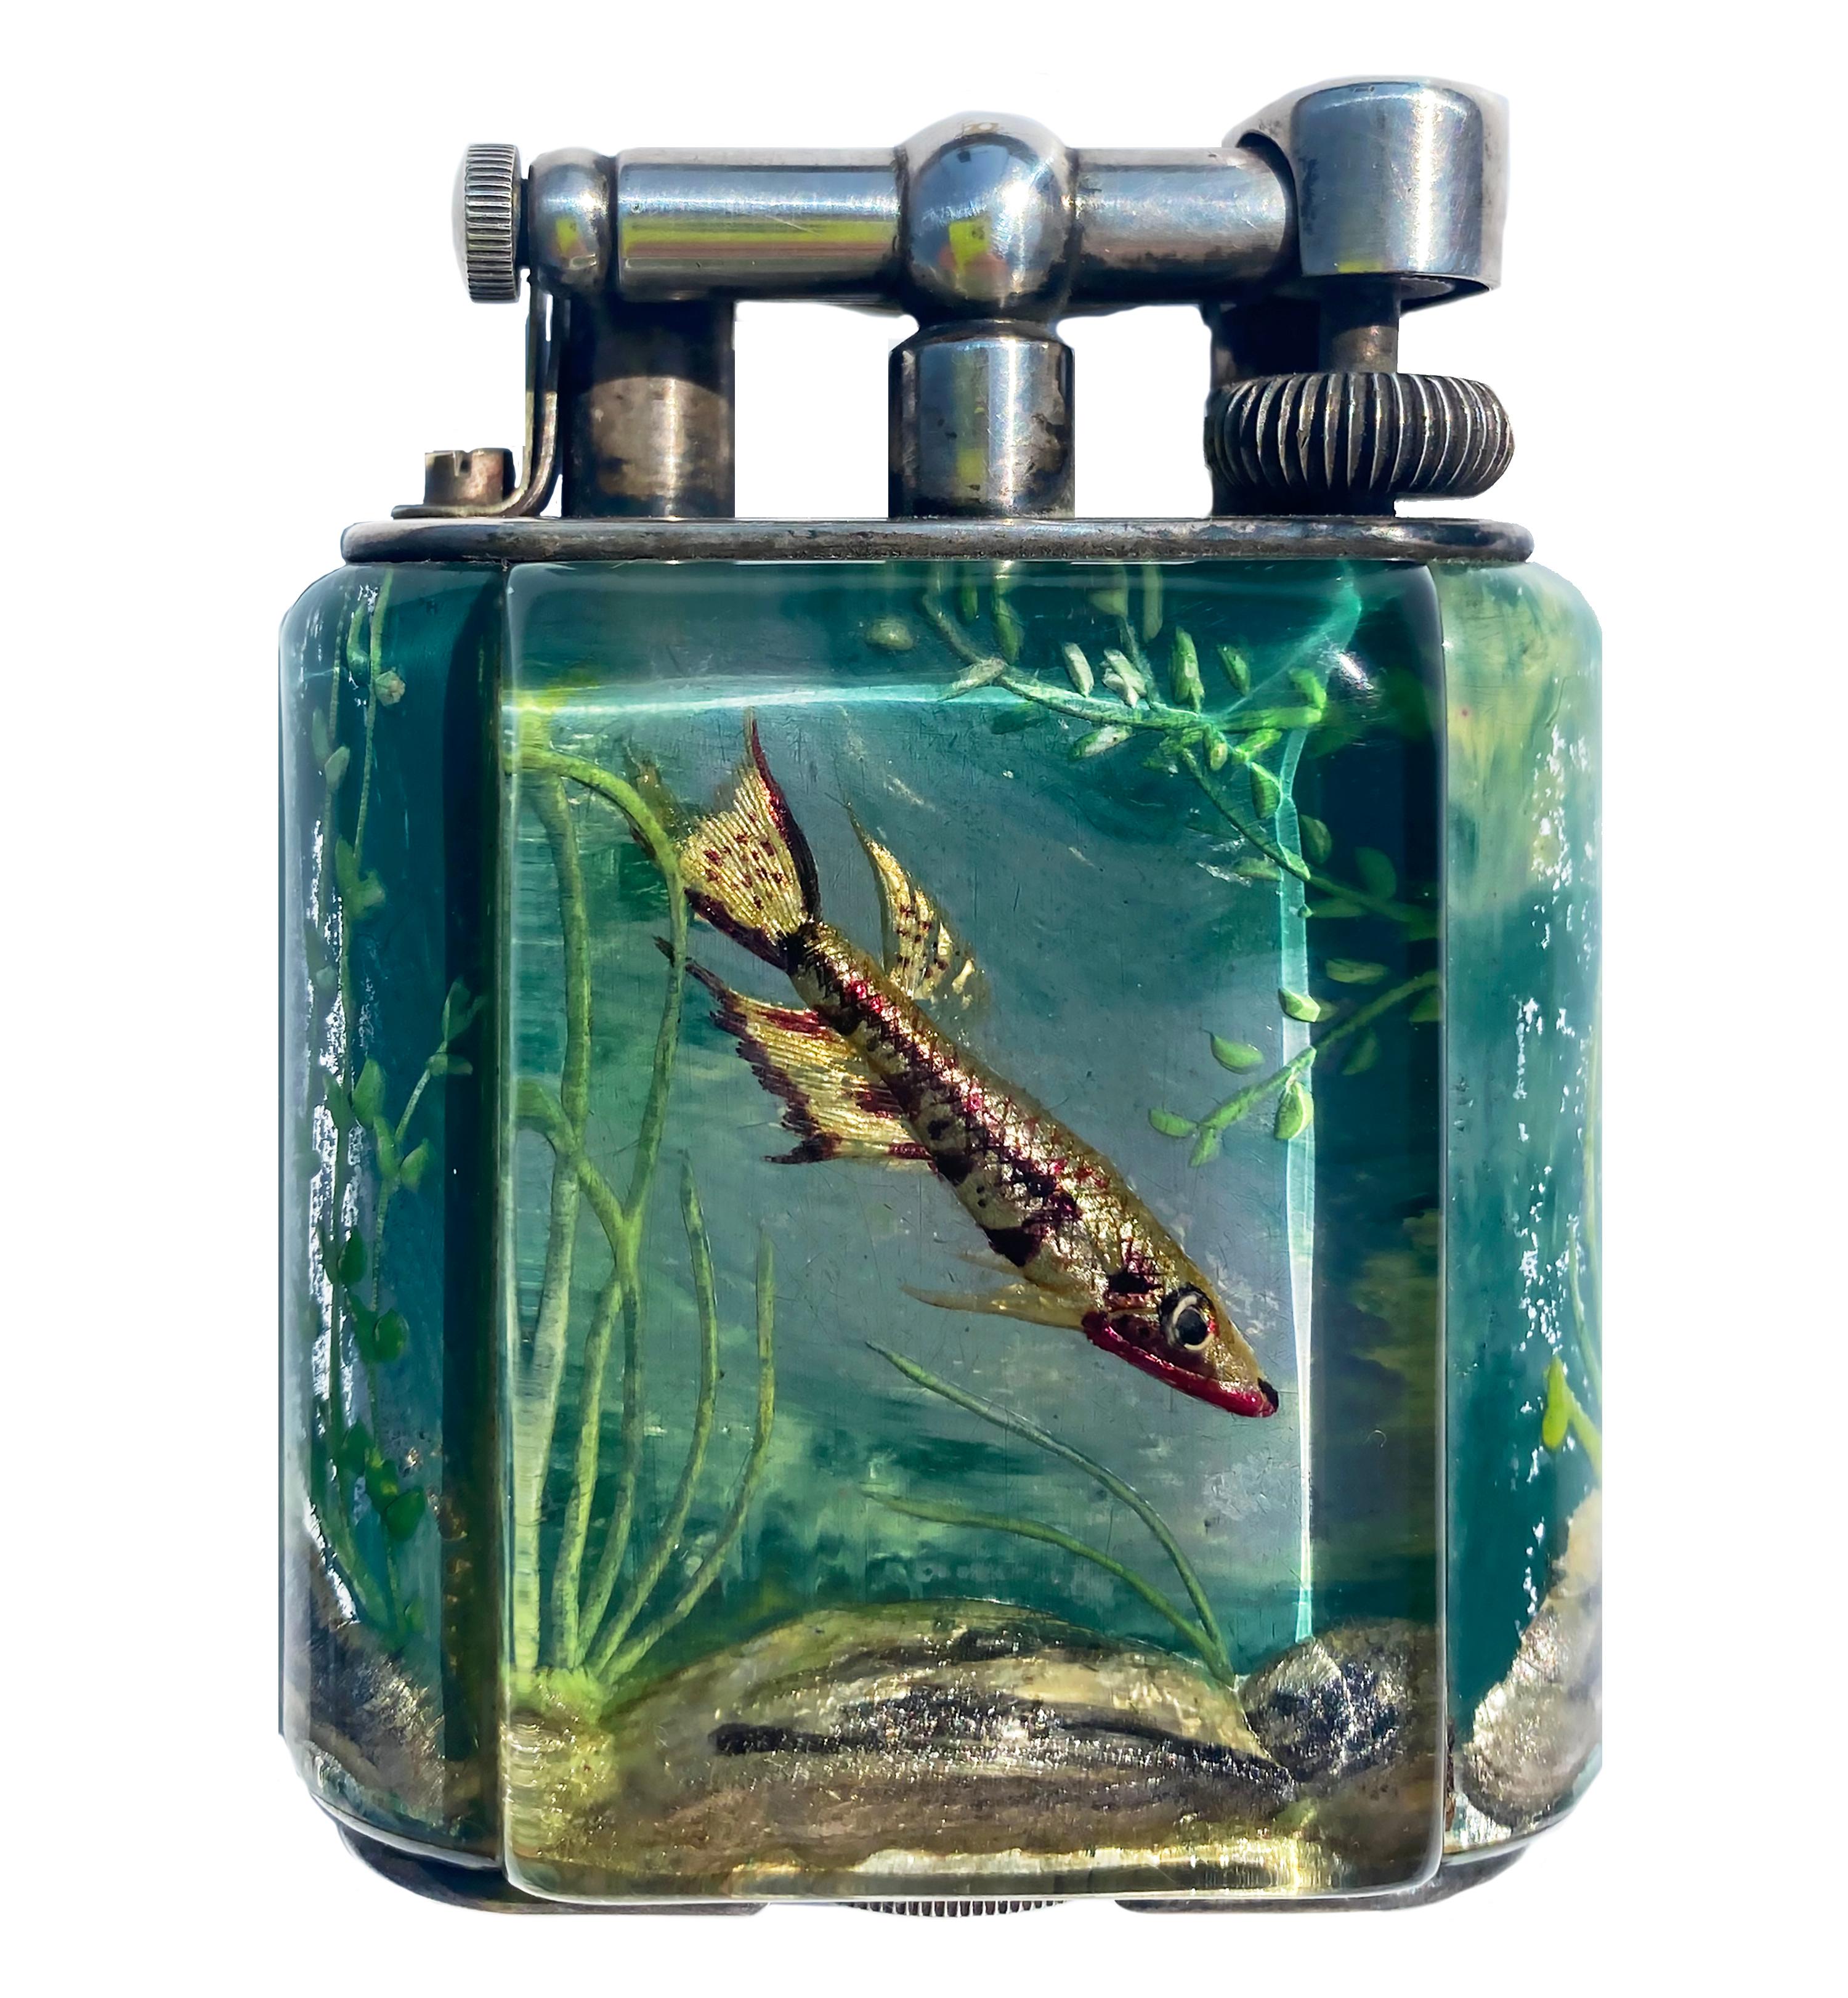 Rare
1950s Dunhill Aquarium Lighter Created by Artist Ben Schillingford
Handmade in England
Service Size
In Working Condition

Alfred Dunhill was an English tobacconist, entrepreneur and inventor. He is the progenitor of Alfred Dunhill Ltd. a